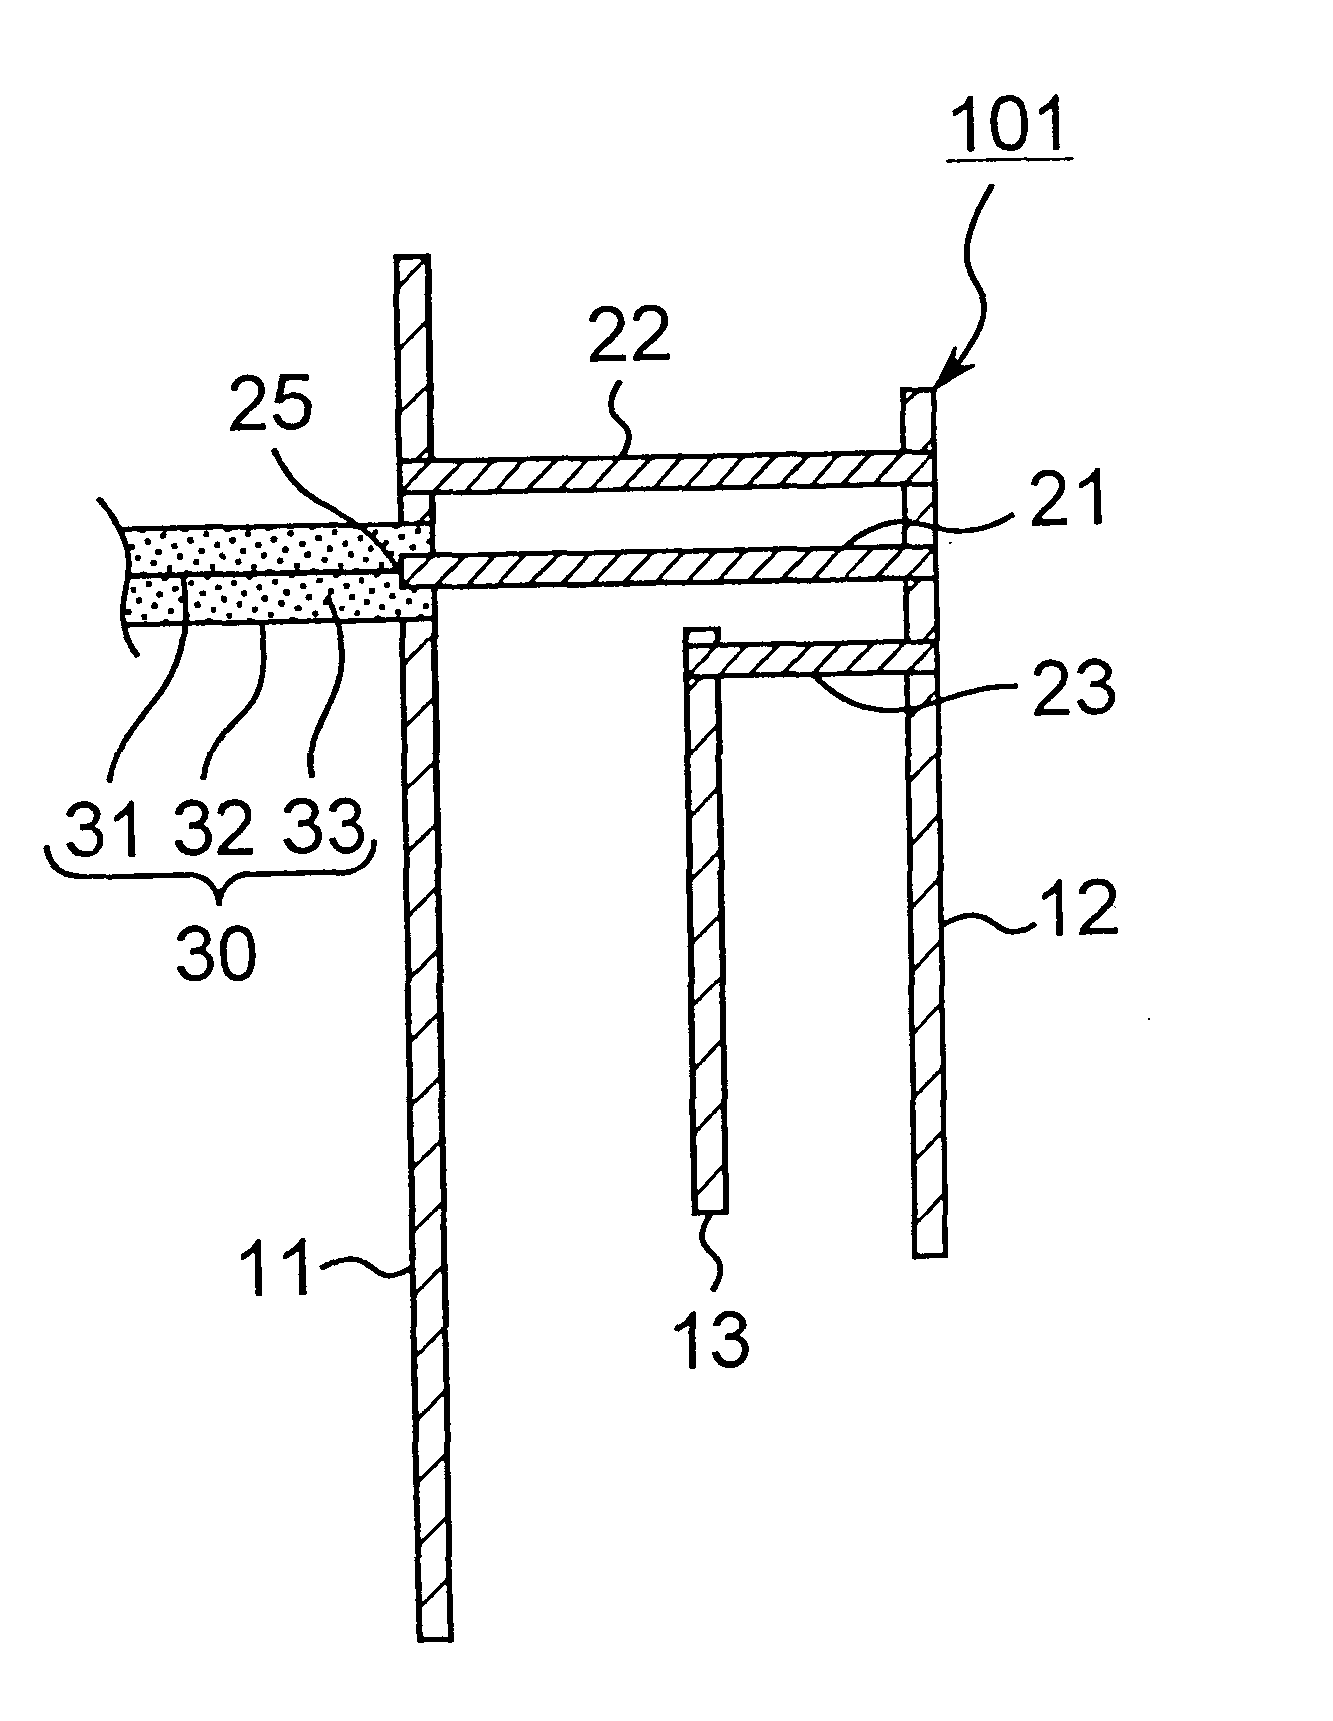 Inverted F-type antenna apparatus and portable radio communication apparatus provided with the inverted F-type antenna apparatus